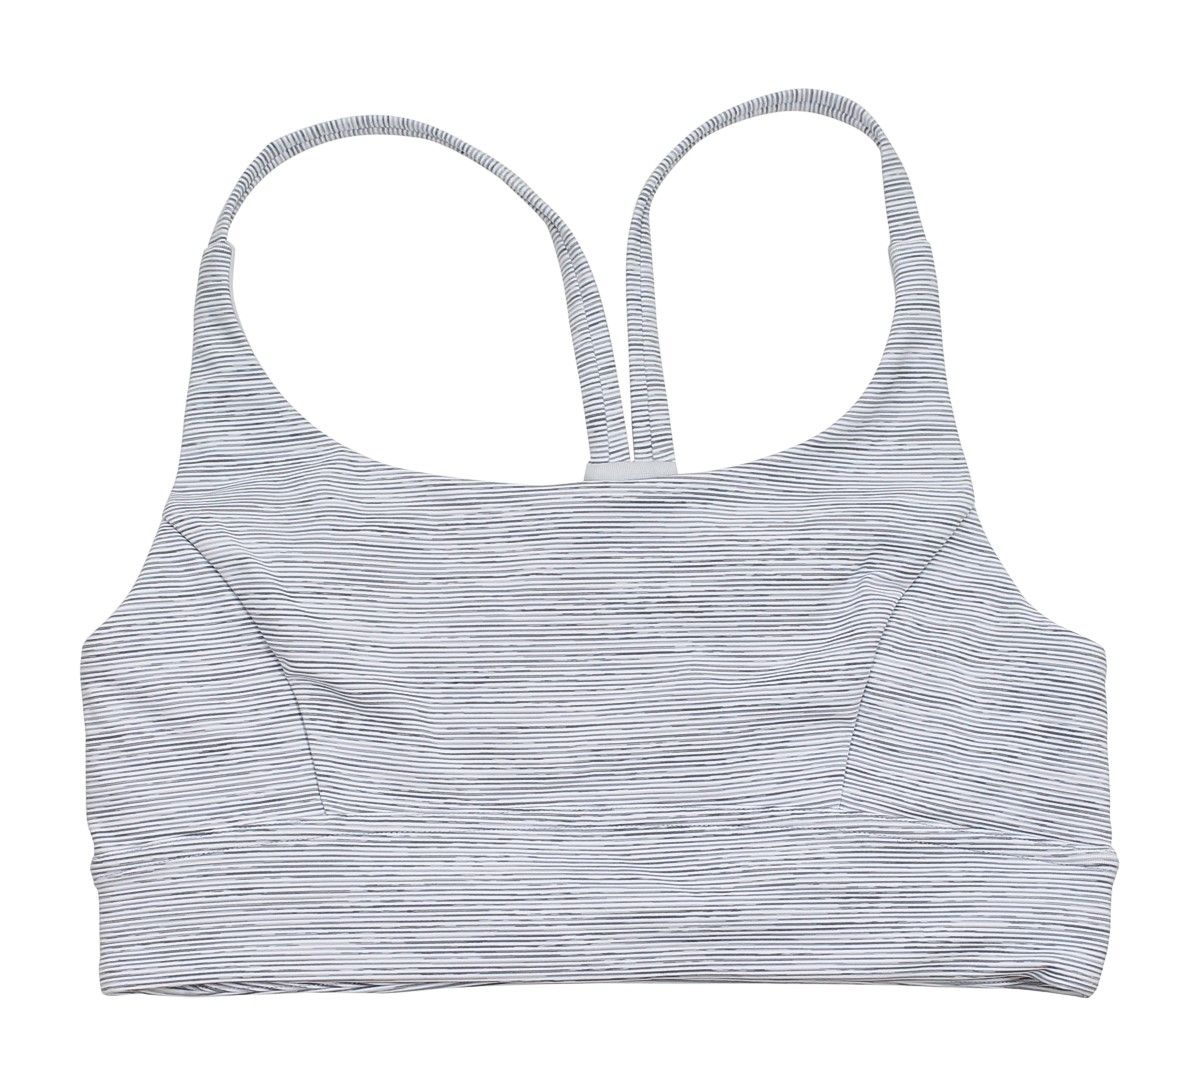 this 18-piece workout wardrobe will motivate you to get moving